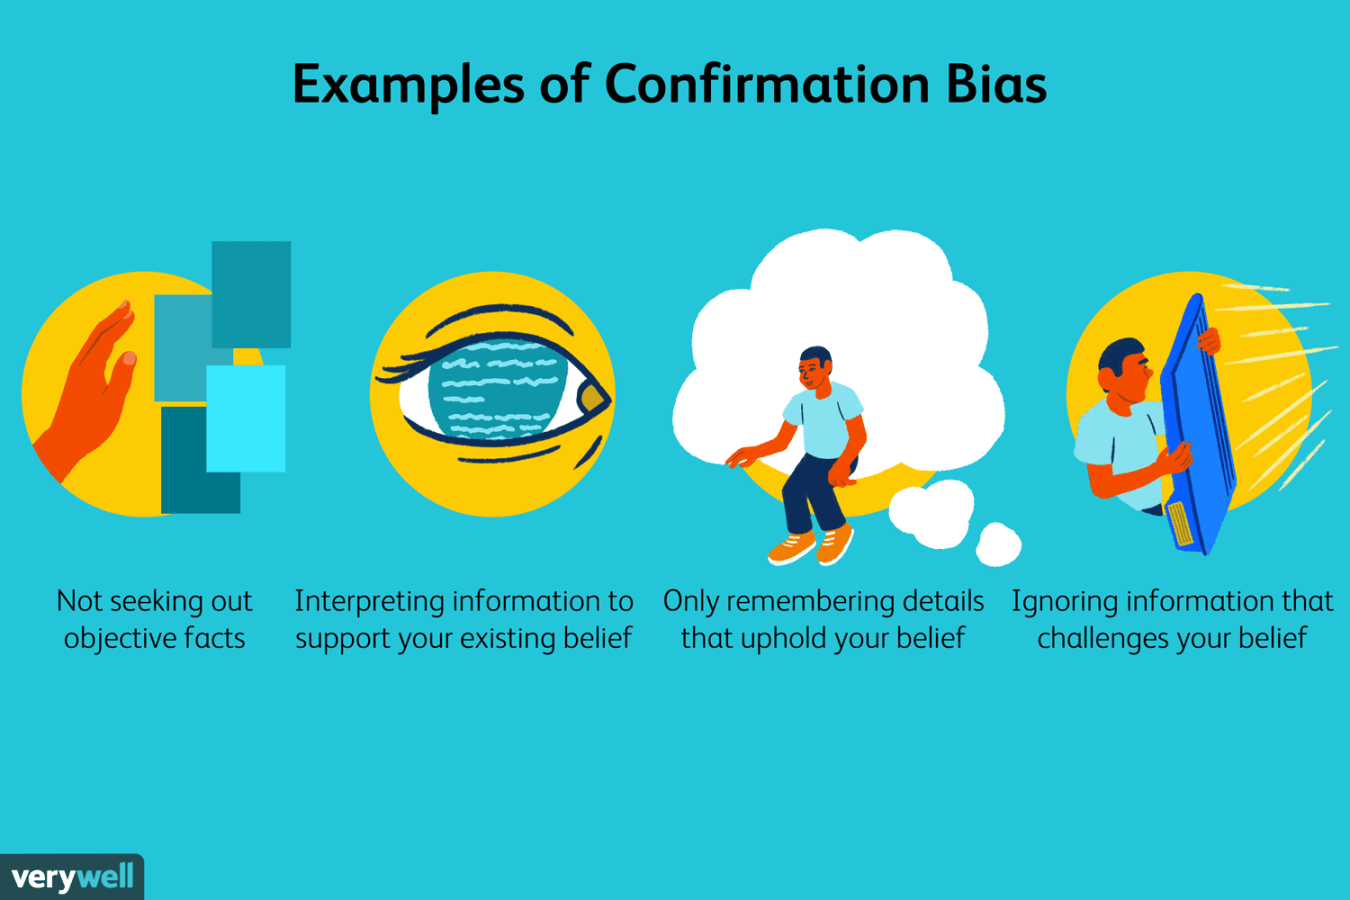 Confirmation Bias: Definition, Signs, Overcoming